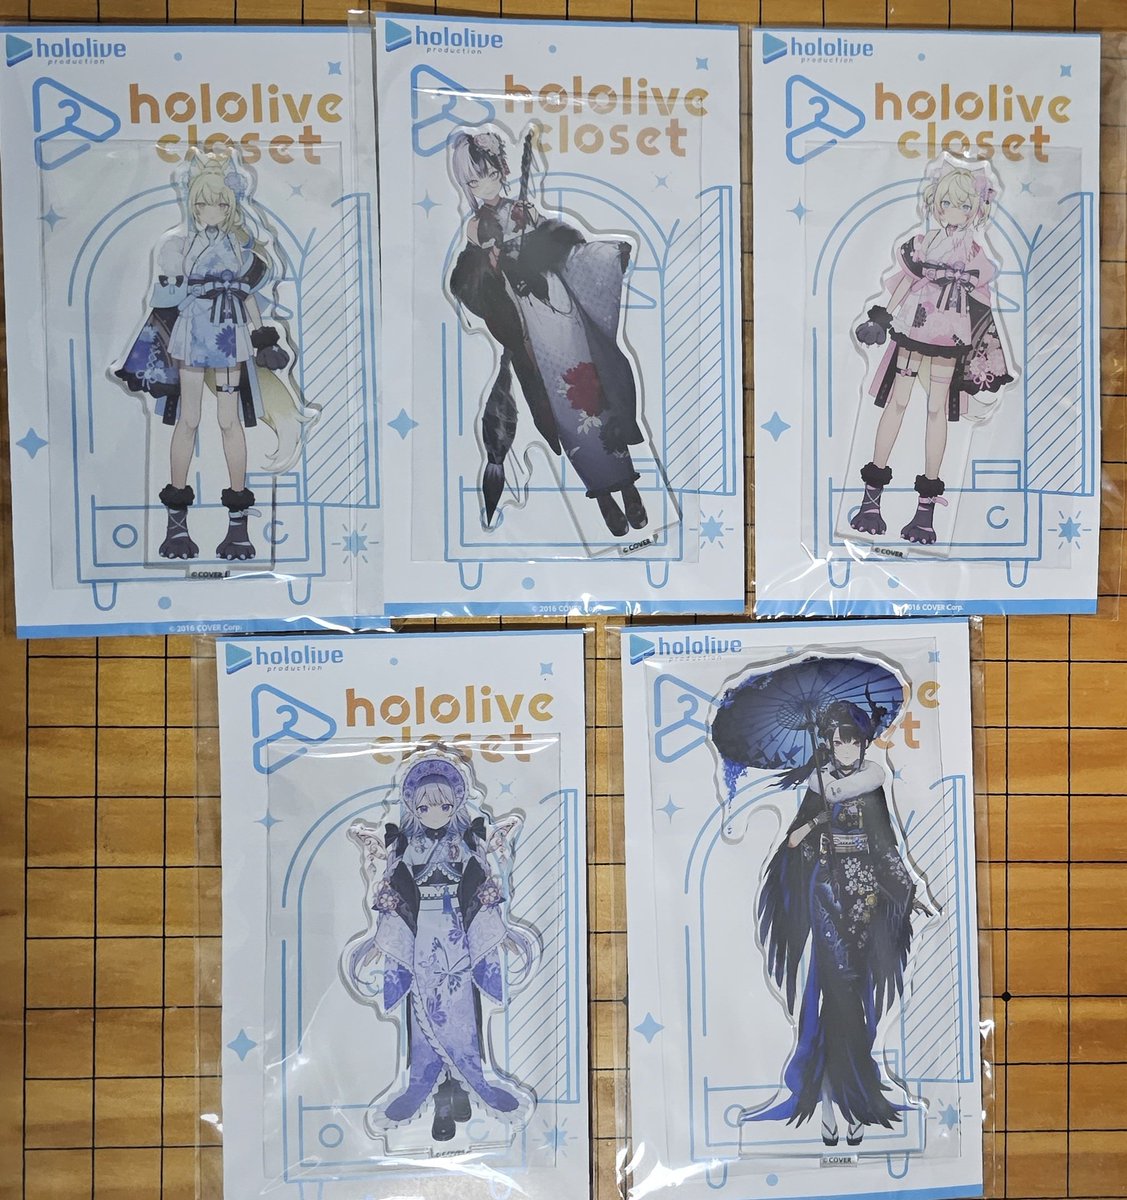 The new year costume stands arrived! Looking good, girls.
#FUWAMOCO
#holoAdvent